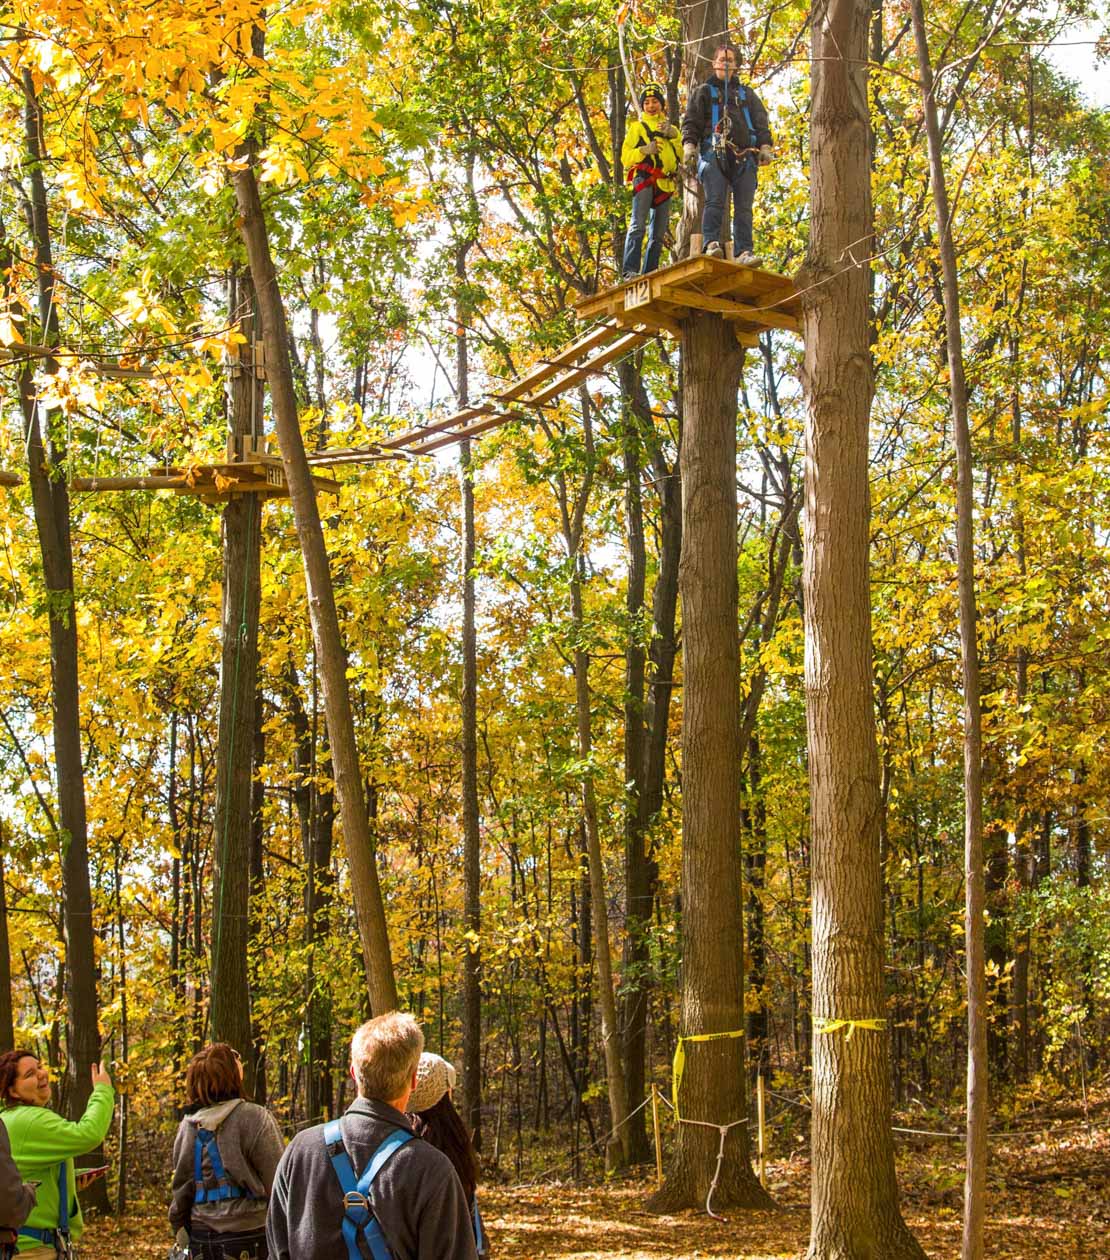 Group on the ropes course in autumn